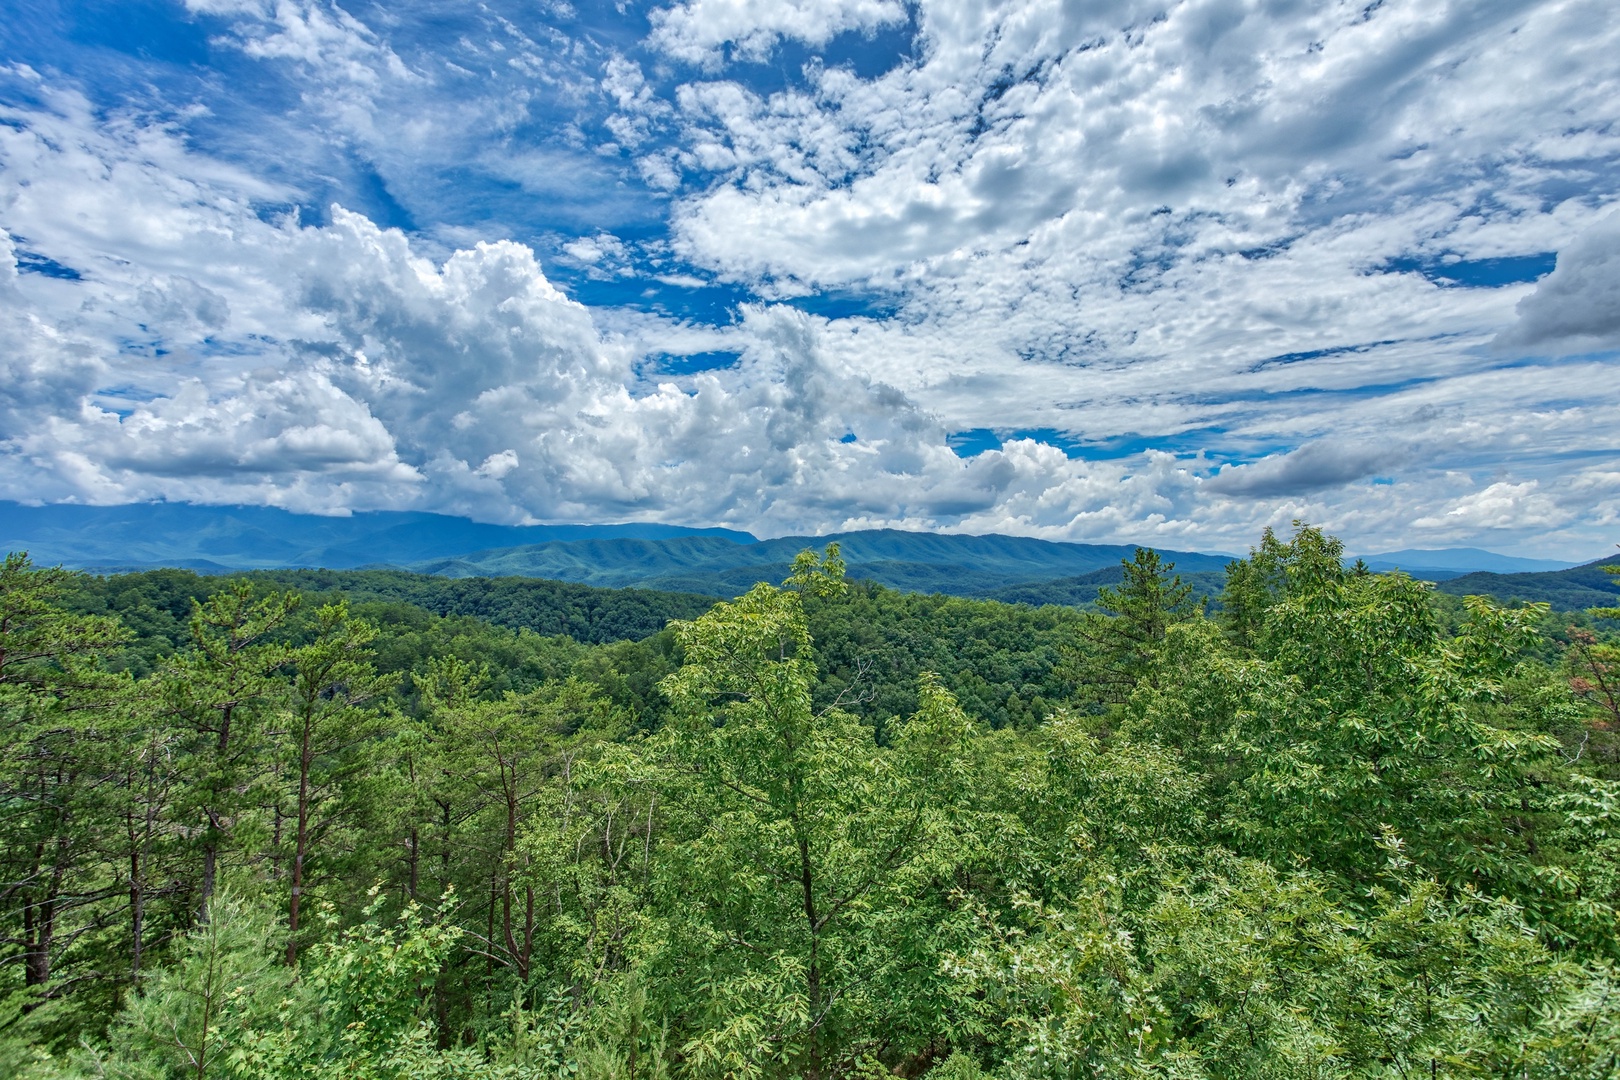 Mountain view from the hot tub at I Do Love Views, a 3 bedroom cabin rental located in Pigeon Forge